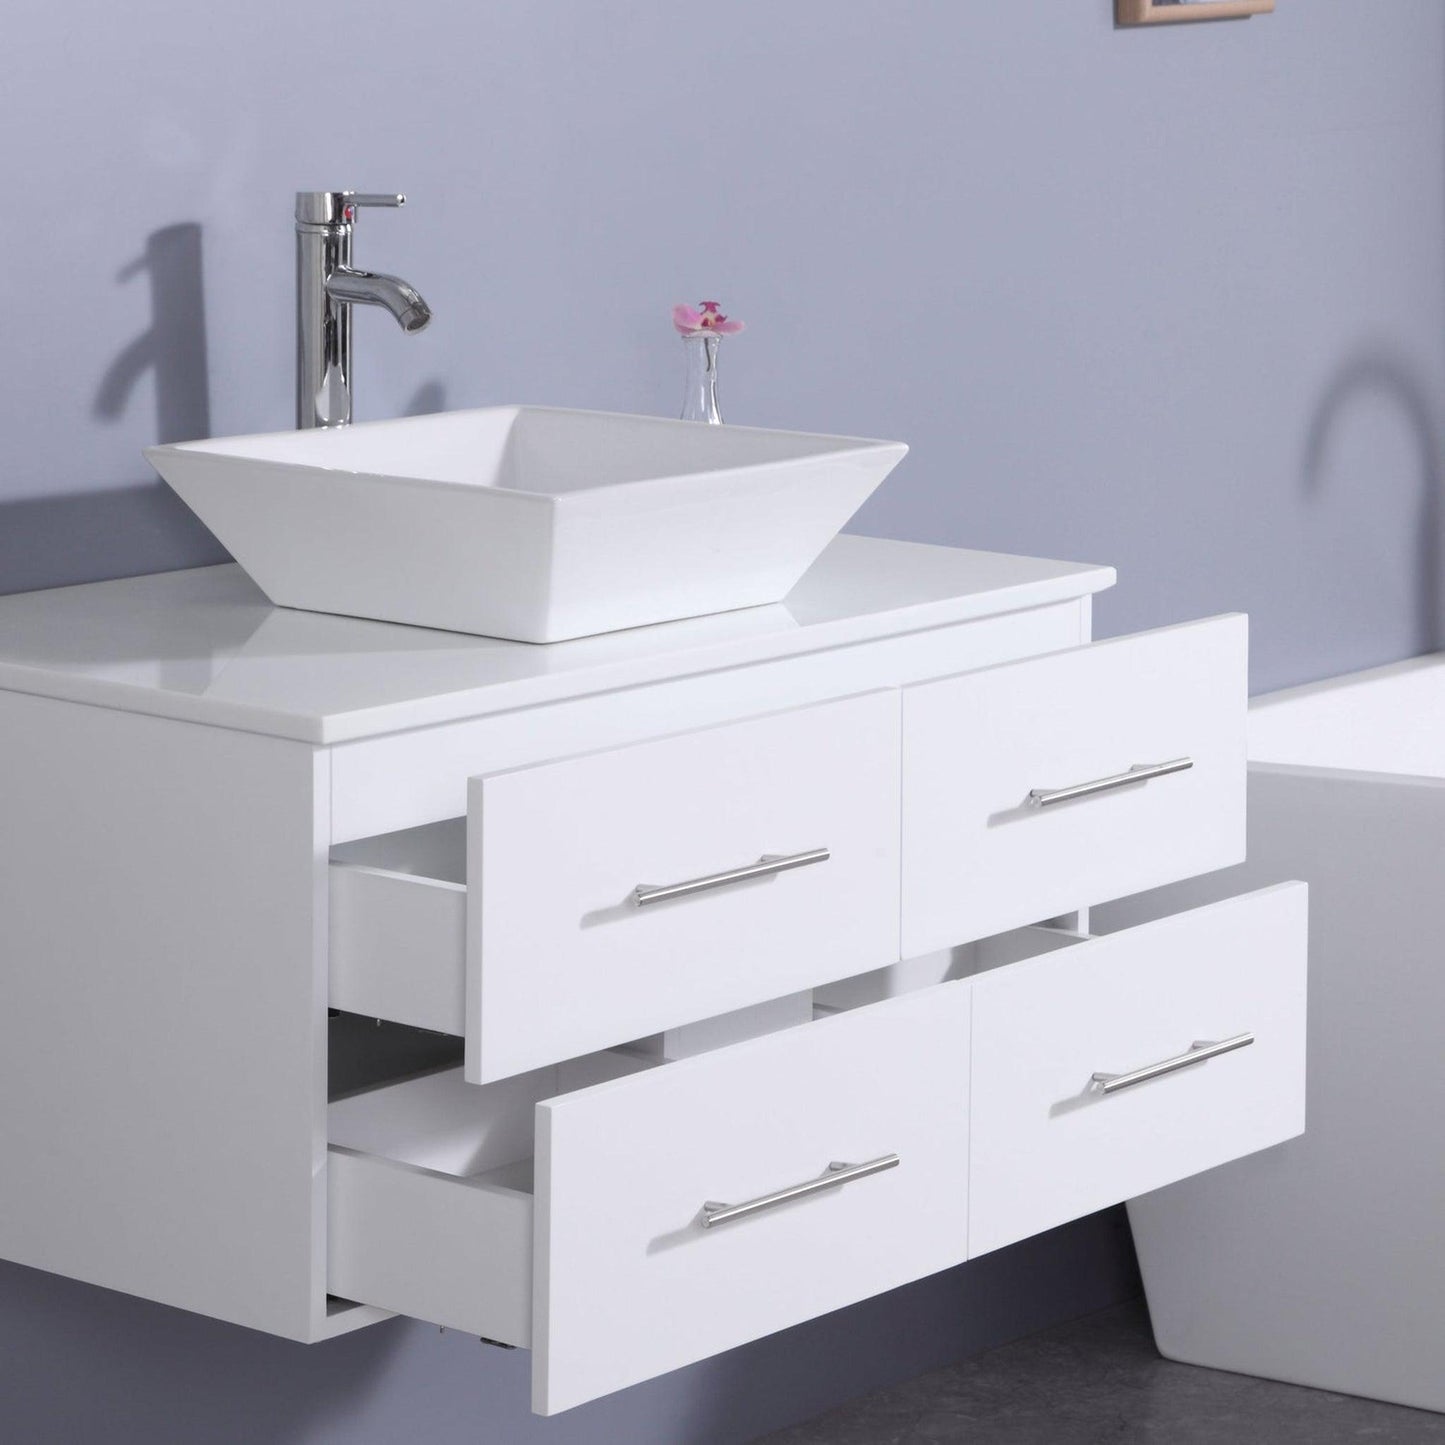 Eviva Totti Wave 36" x 16" White Wall-Mounted Bathroom Vanity With White Man-Made Stone Countertop and Single Porcelain Sink